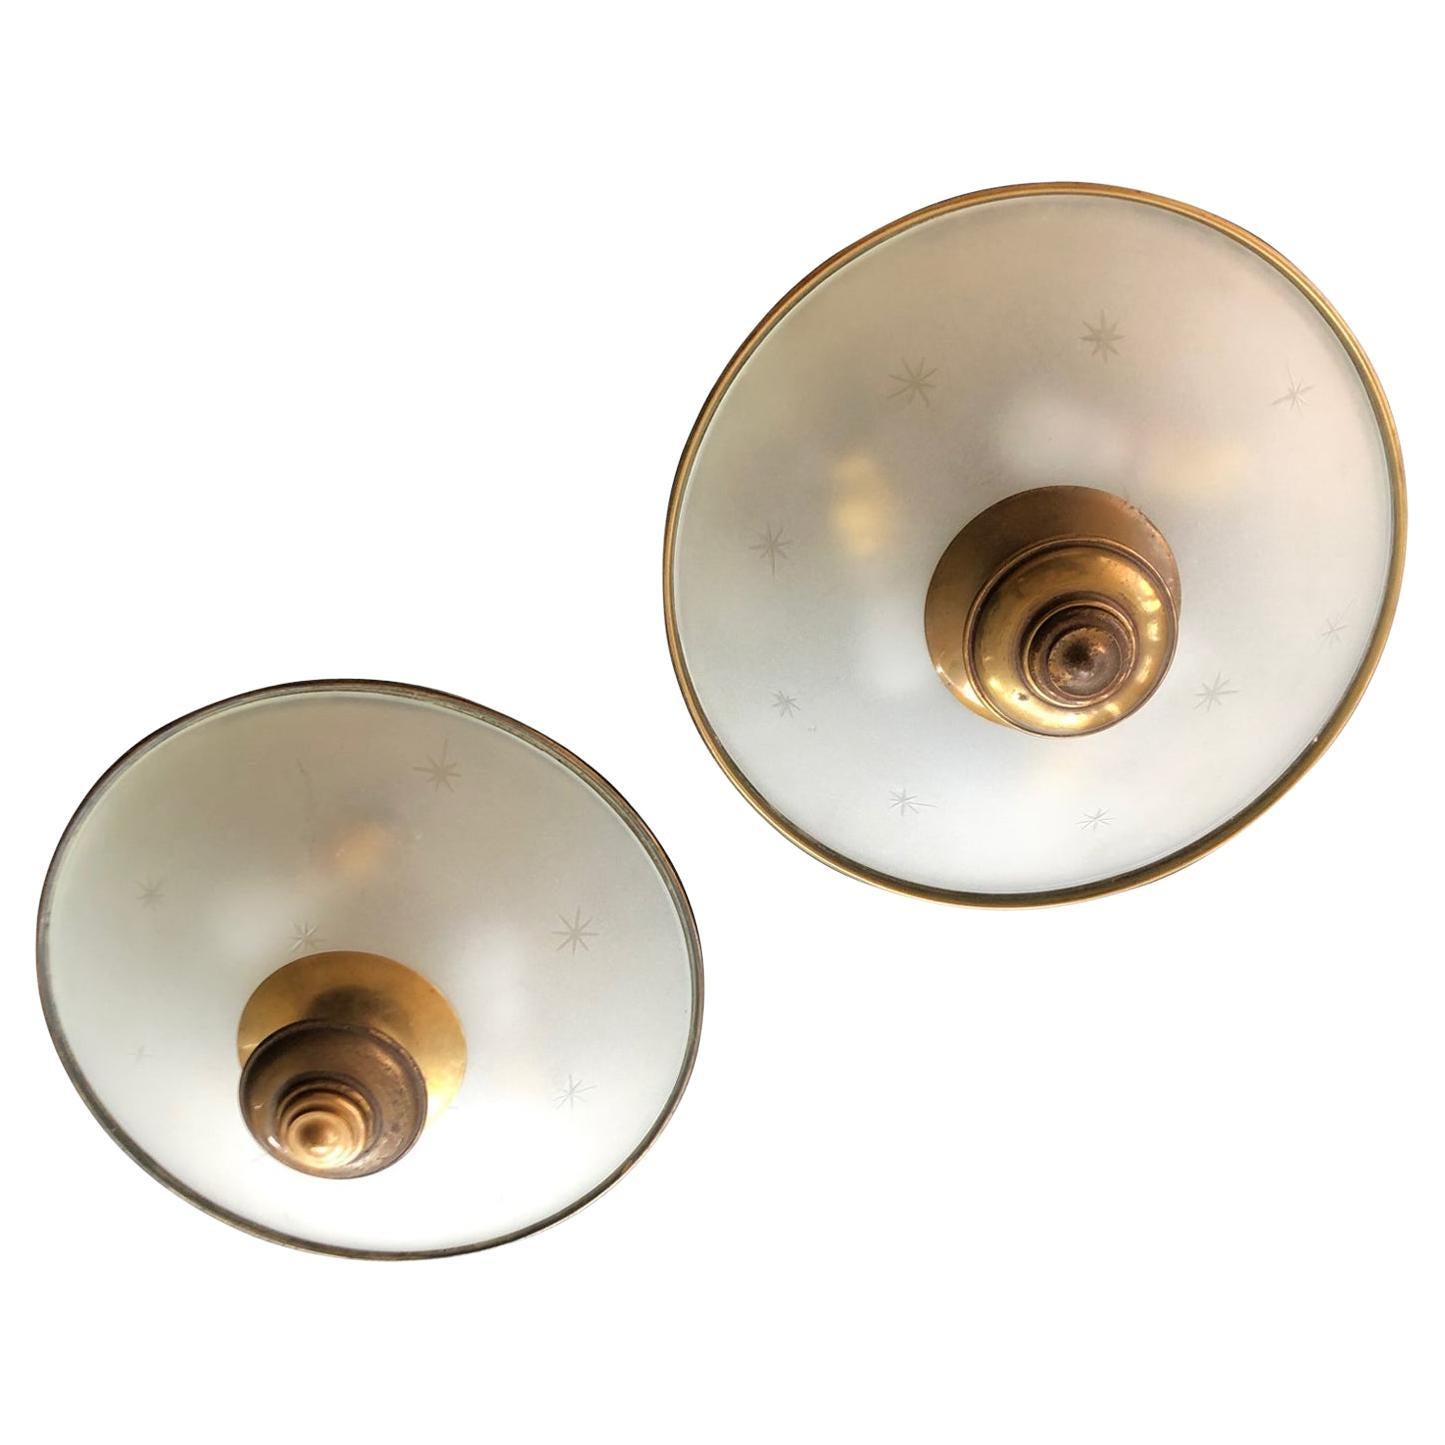 Pair of Midcentury Italian Brass and Glass Ceiling or Wall Lights or Sconces 